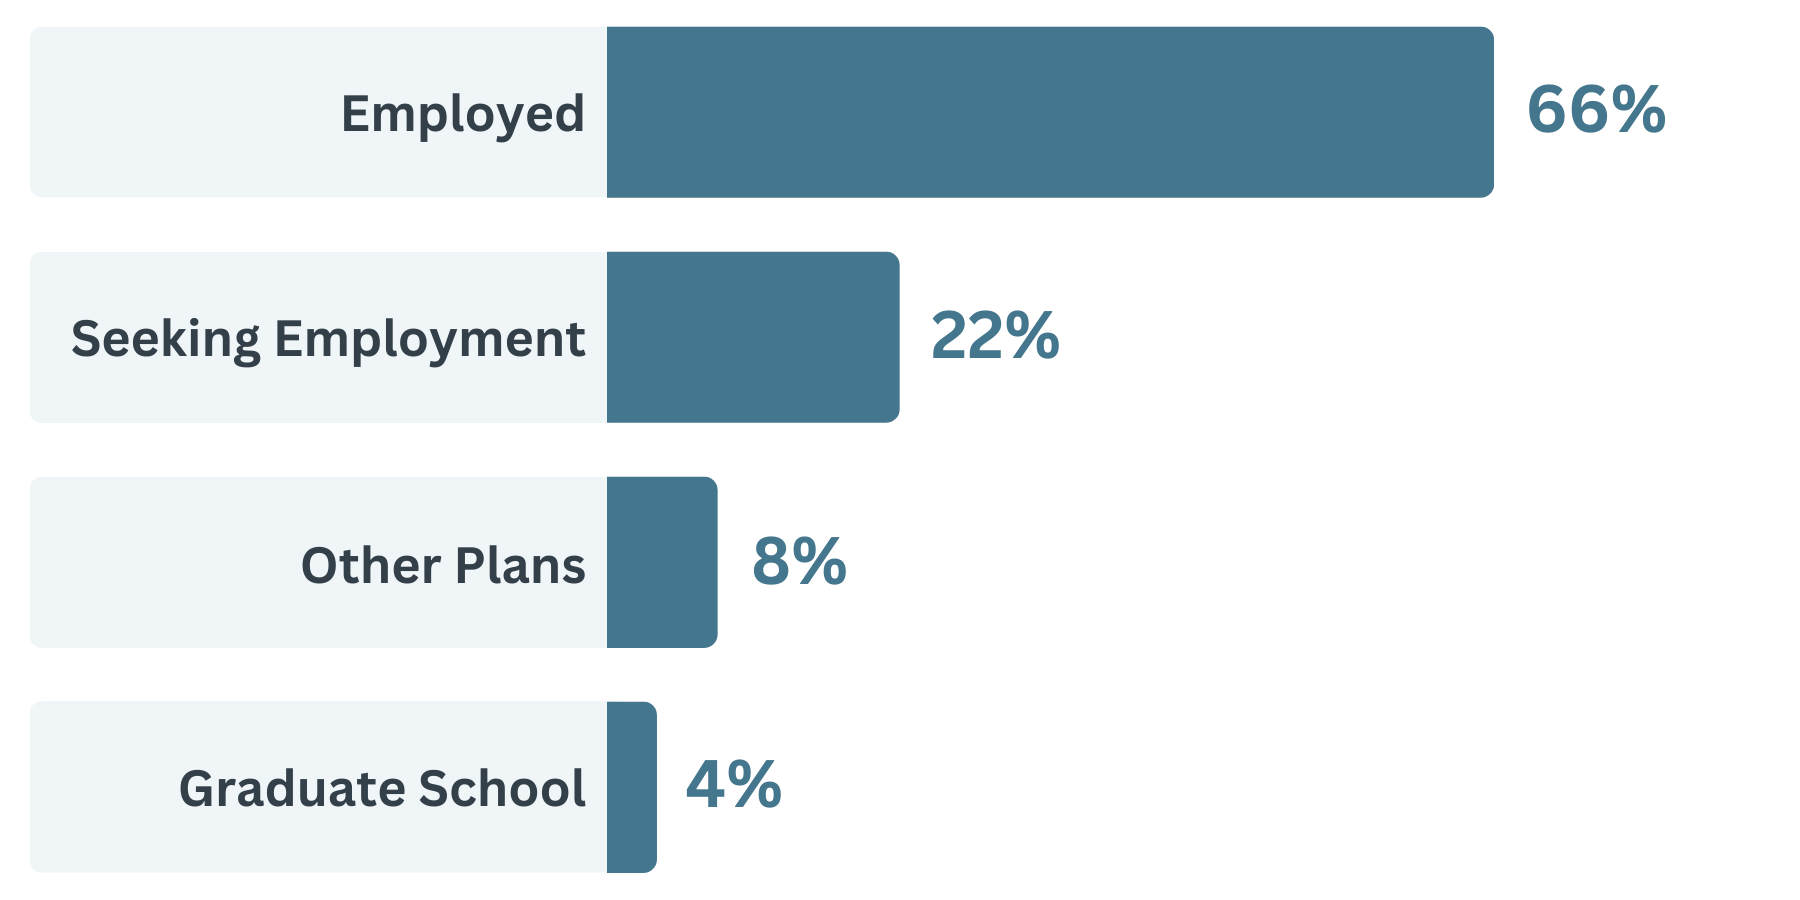 textiles and apparel data: employed 66%, seeking employment 22%, other plans 8%, graduate school 4%